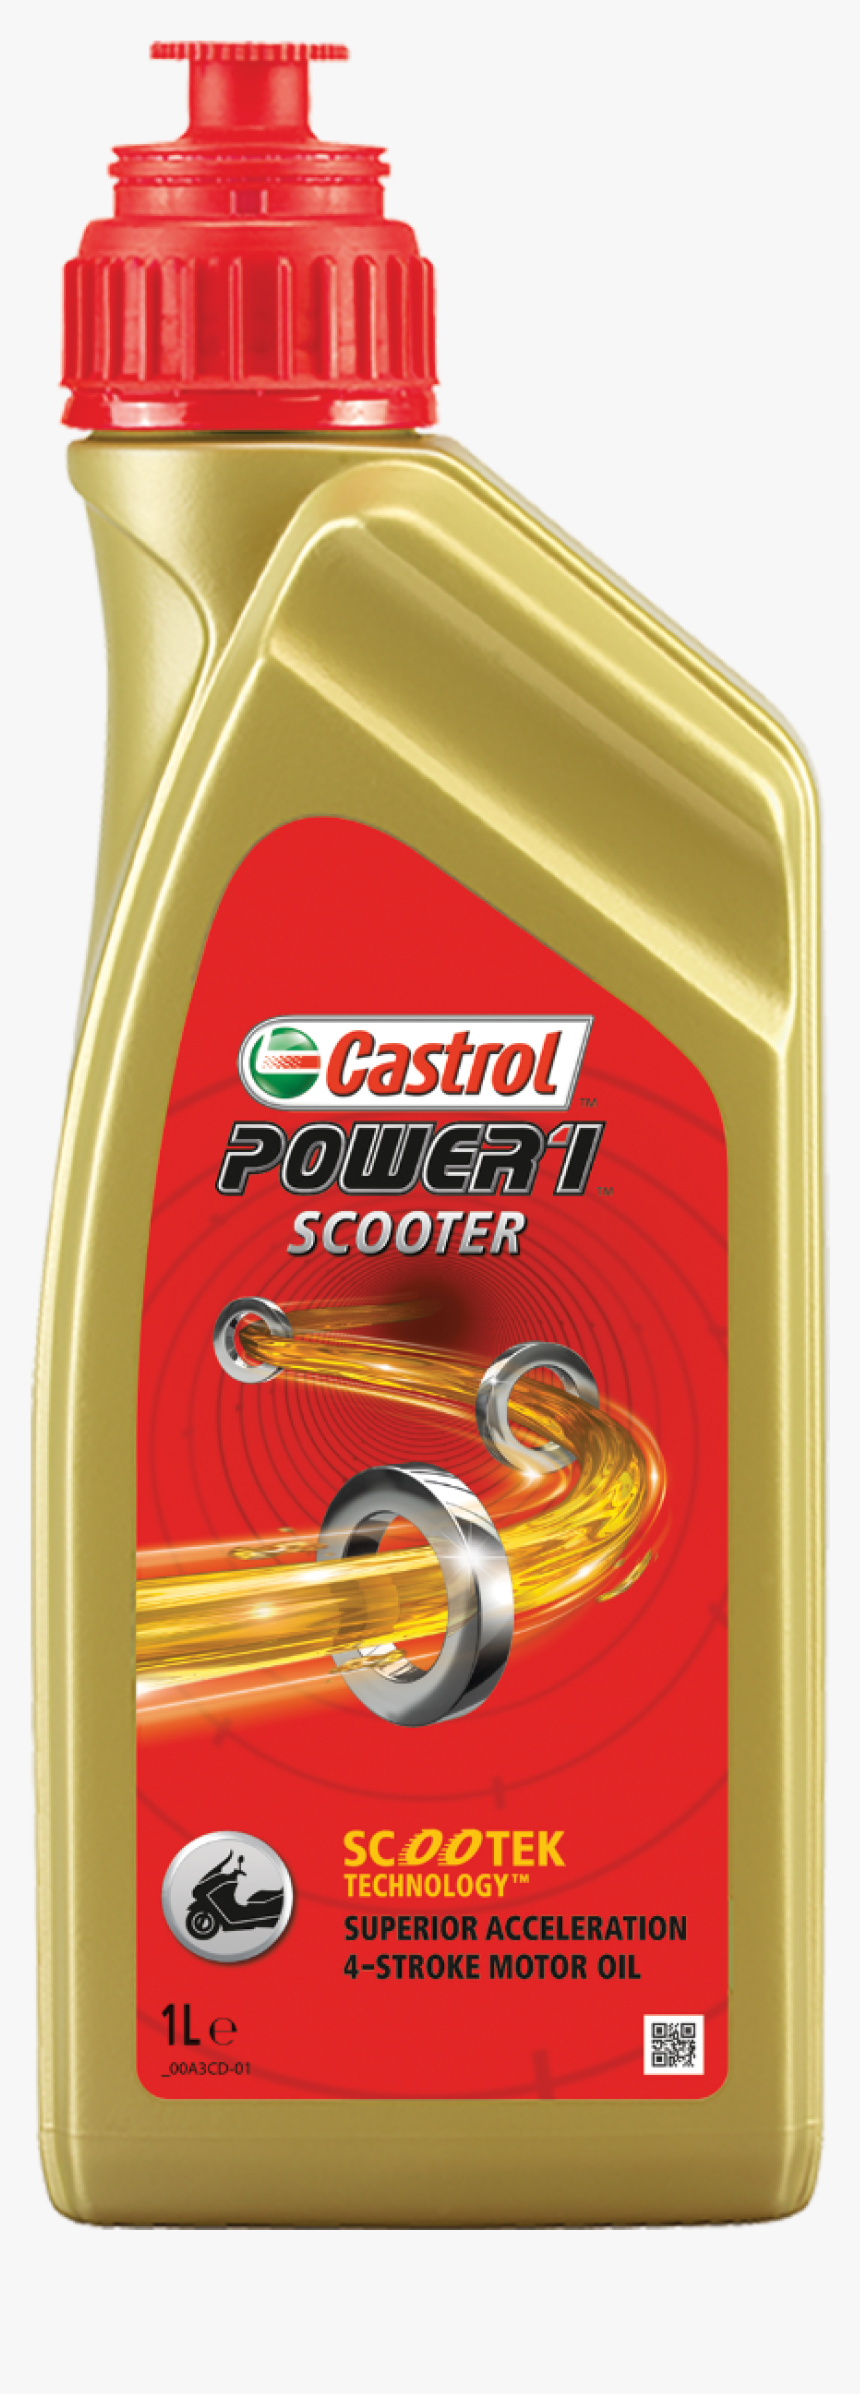 Castrol Power1 Scooter - Castrol Power 1 Racing, HD Png Download, Free Download